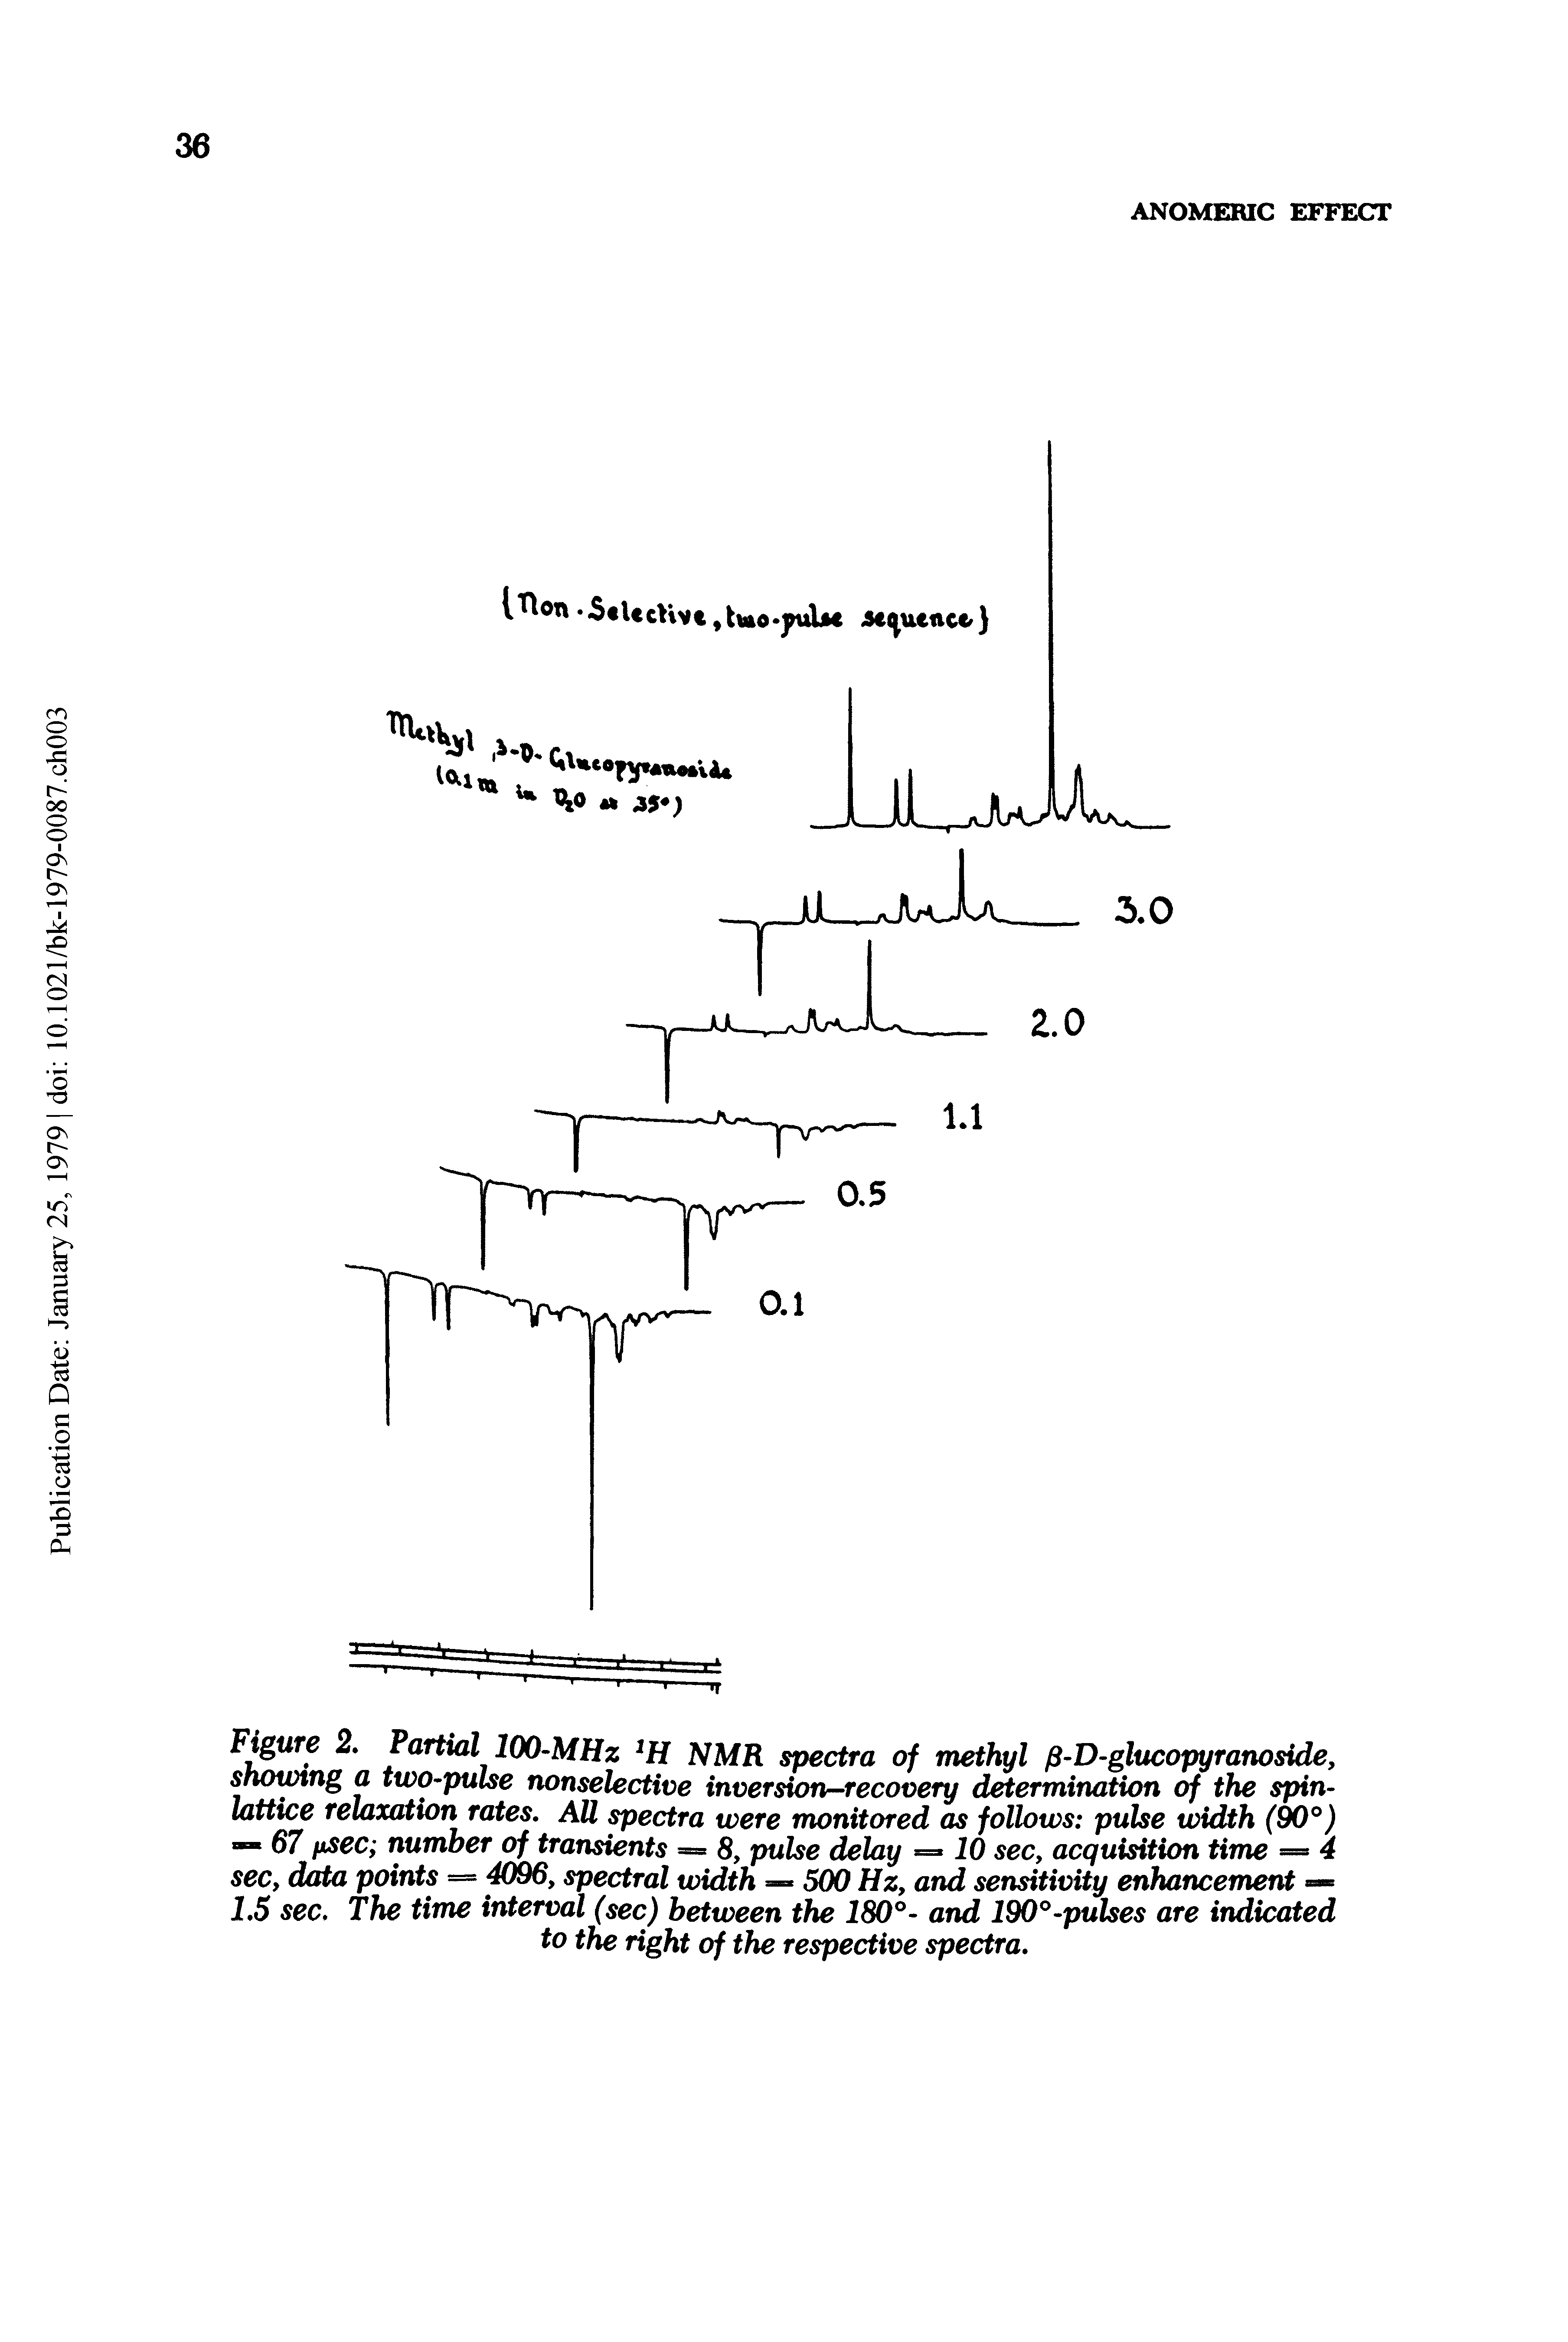 Figure 2, Partial 100-MHz 1H NMR spectra of methyl fi-D-glucopyranoside, showing a two-pulse nonselective inversion-recovery determination of the spin-lattice relaxation rates. AU spectra were monitored as follows pulse width (90°) — 67 ftsec number of transients — 8, pulse delay = JO sec, acquisition time = 4 sec, data points = 4096, spectral width — 500 Hz, and sensitivity enhancement — 1.5 sec. The time interval (sec) between the 180°- and 190°-pulses are indicated to the right of the respective spectra.